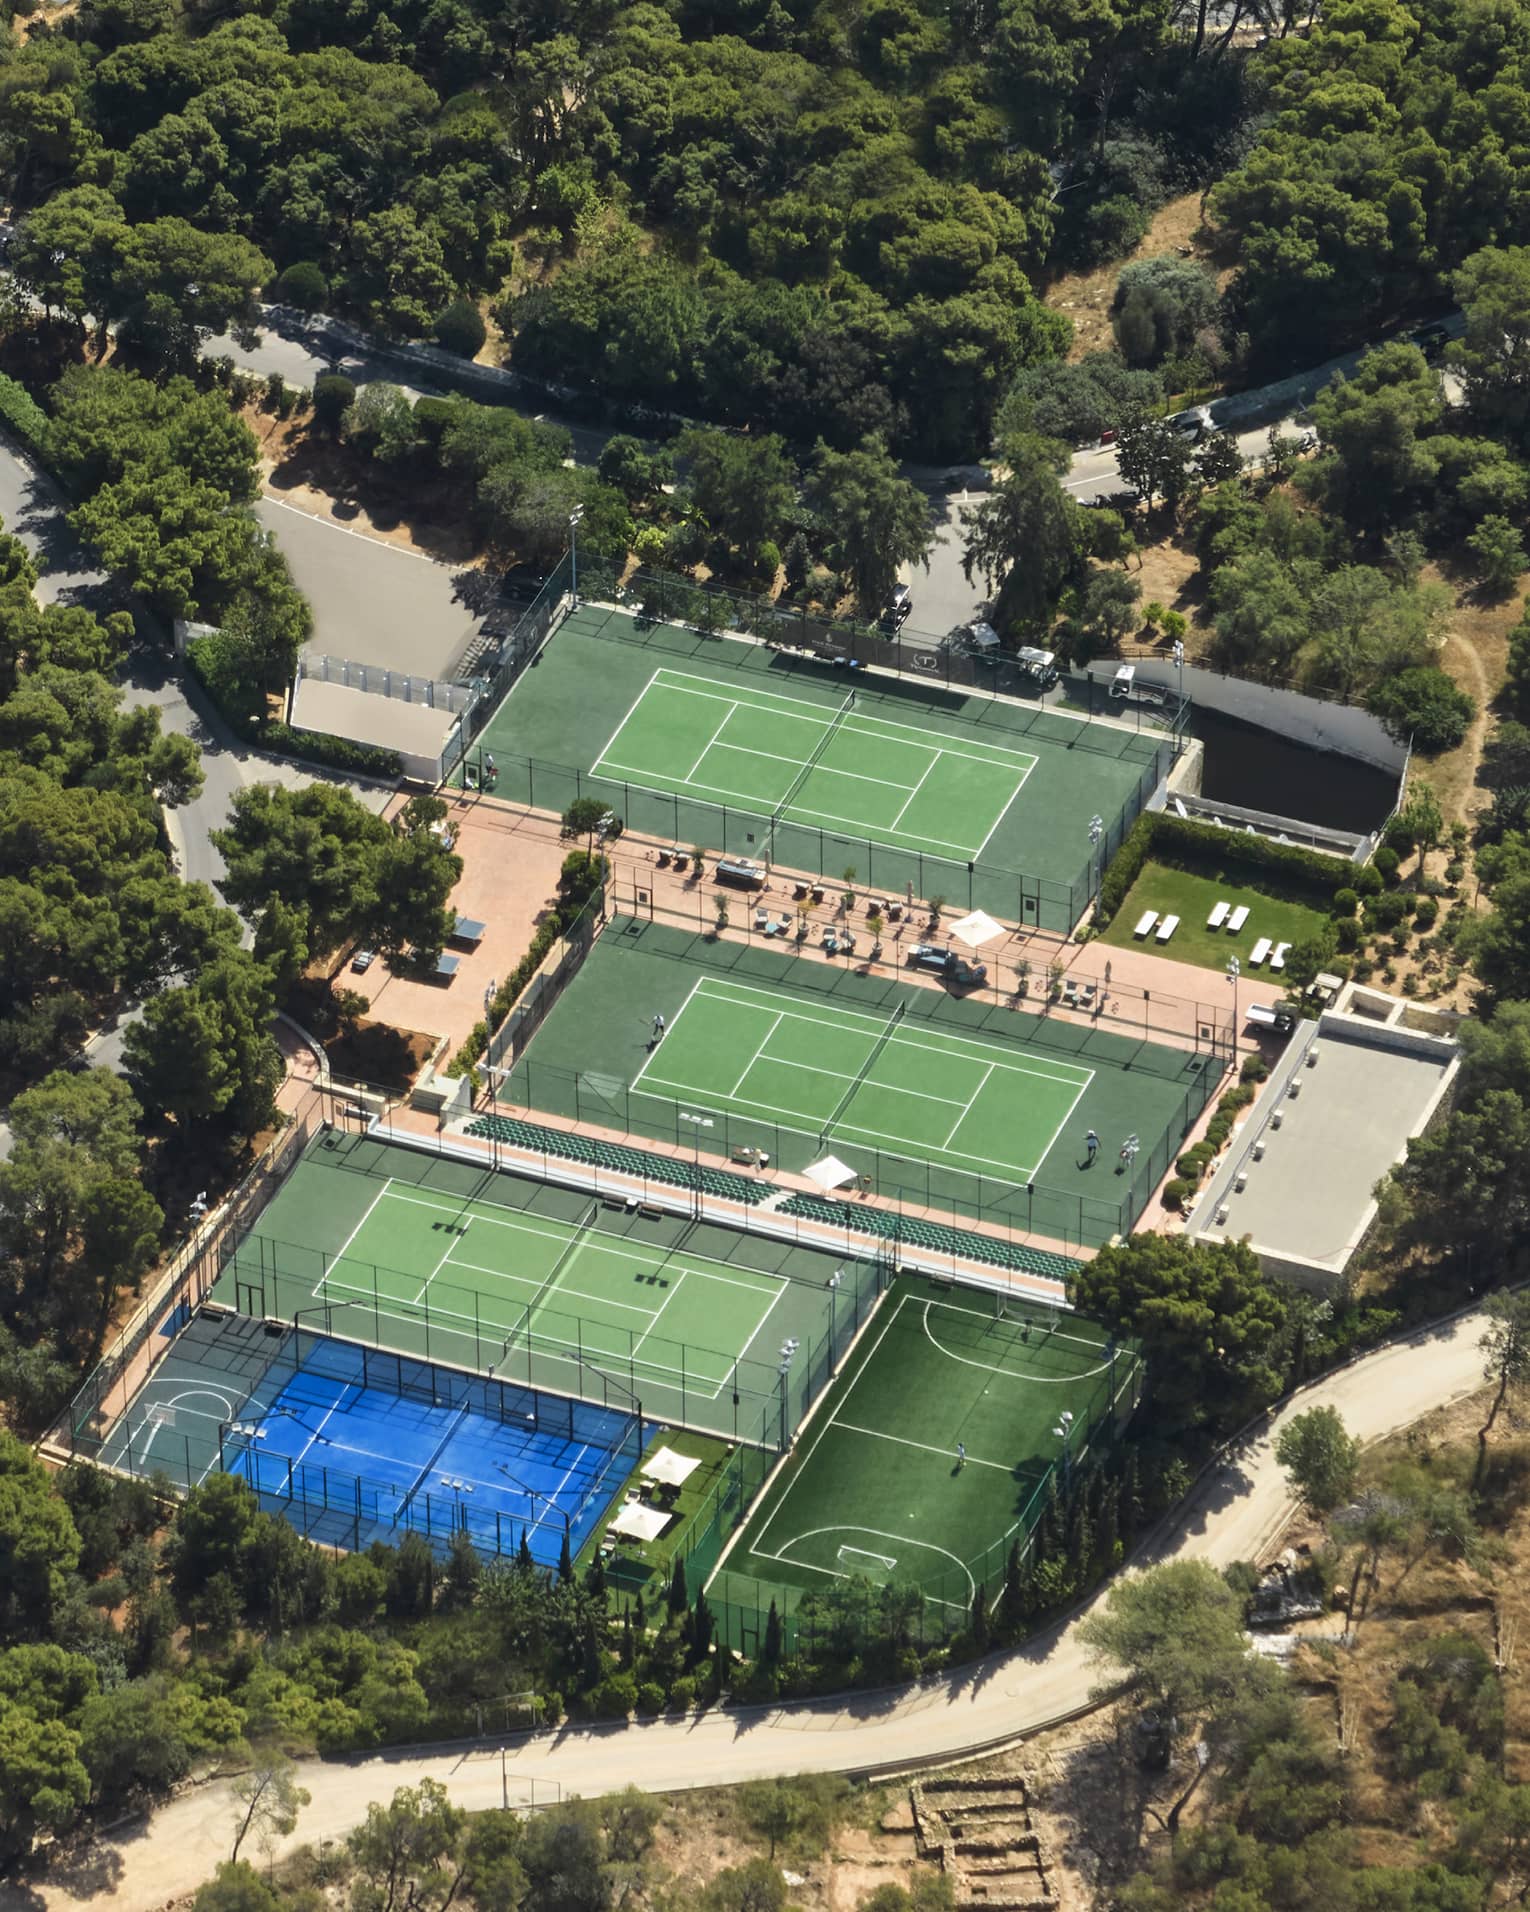 Aerial view of one padel and three tennis courts